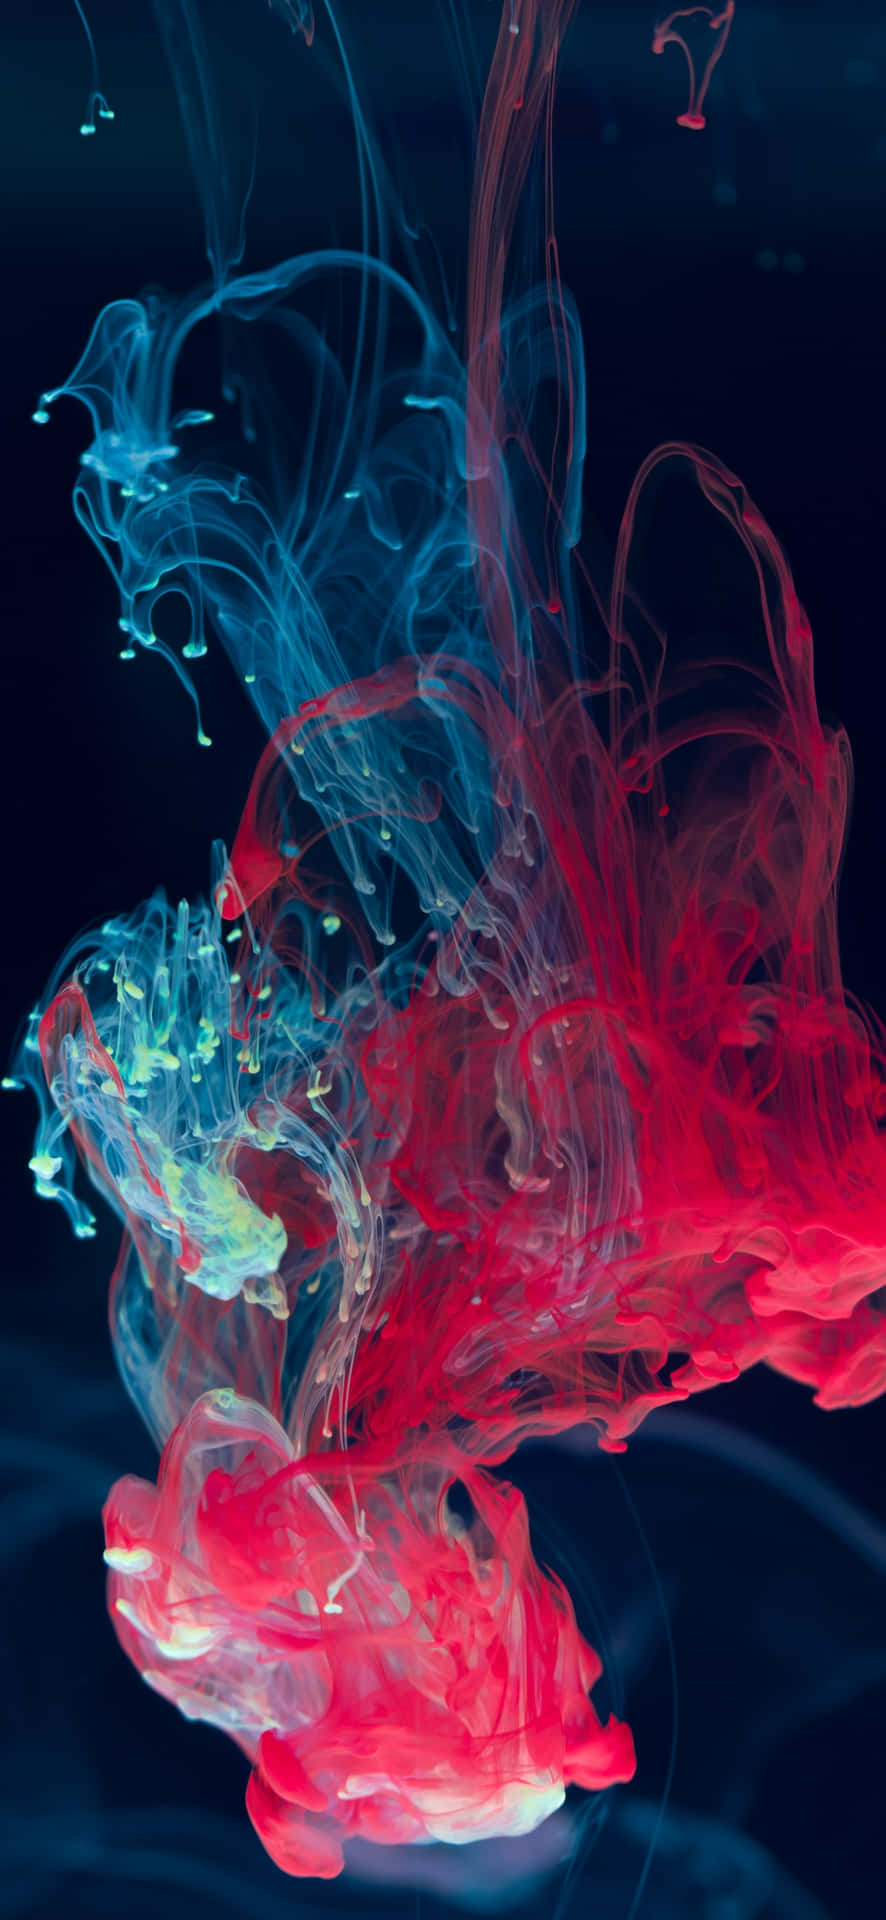 Abstract Red Blue Ink Diffusion Art Wallpaper